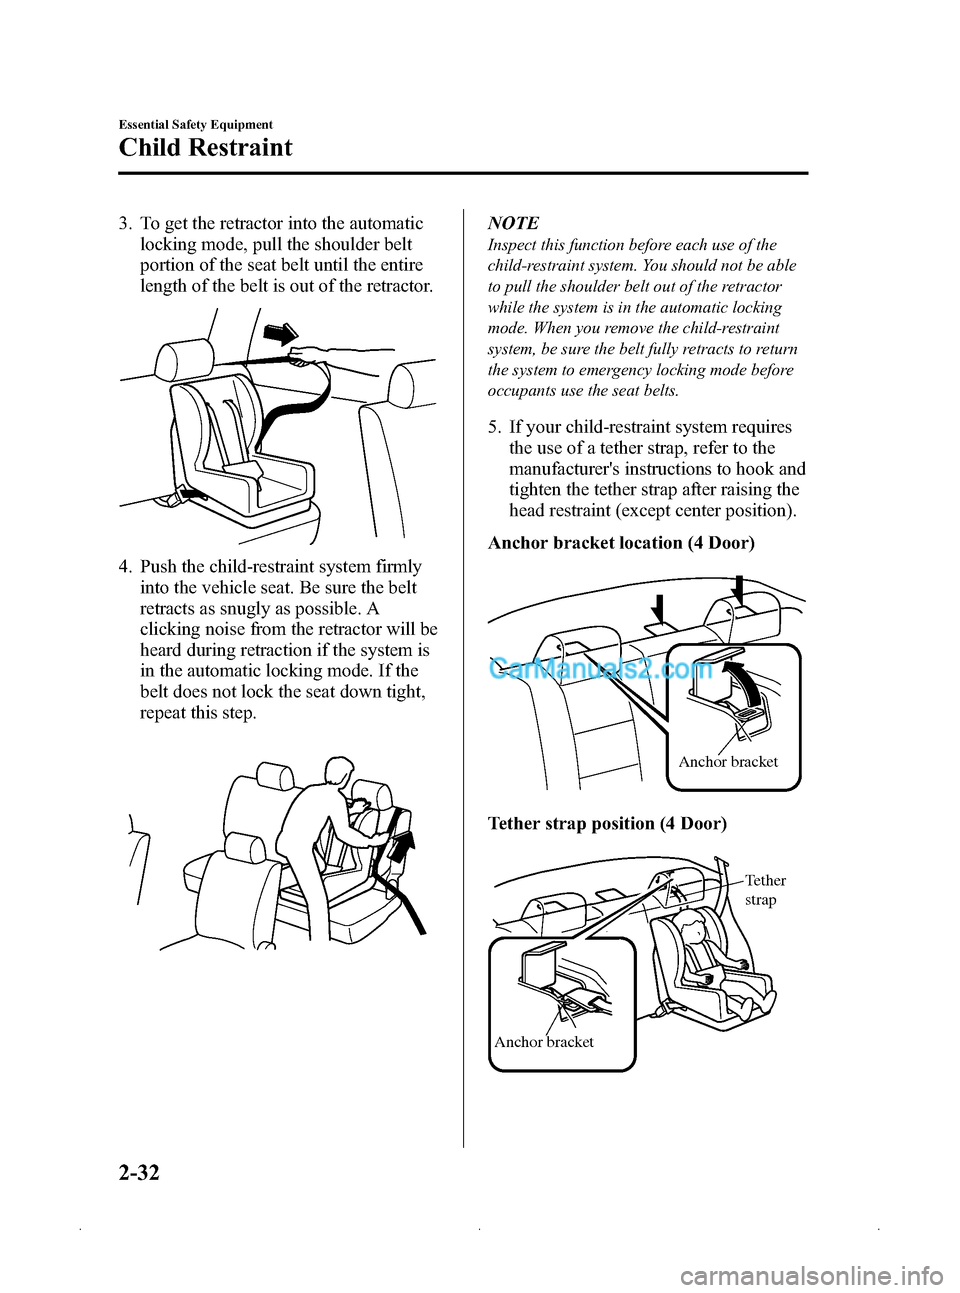 MAZDA MODEL MAZDASPEED 3 2009  Owners Manual (in English) Black plate (46,1)
3. To get the retractor into the automaticlocking mode, pull the shoulder belt
portion of the seat belt until the entire
length of the belt is out of the retractor.
4. Push the chil